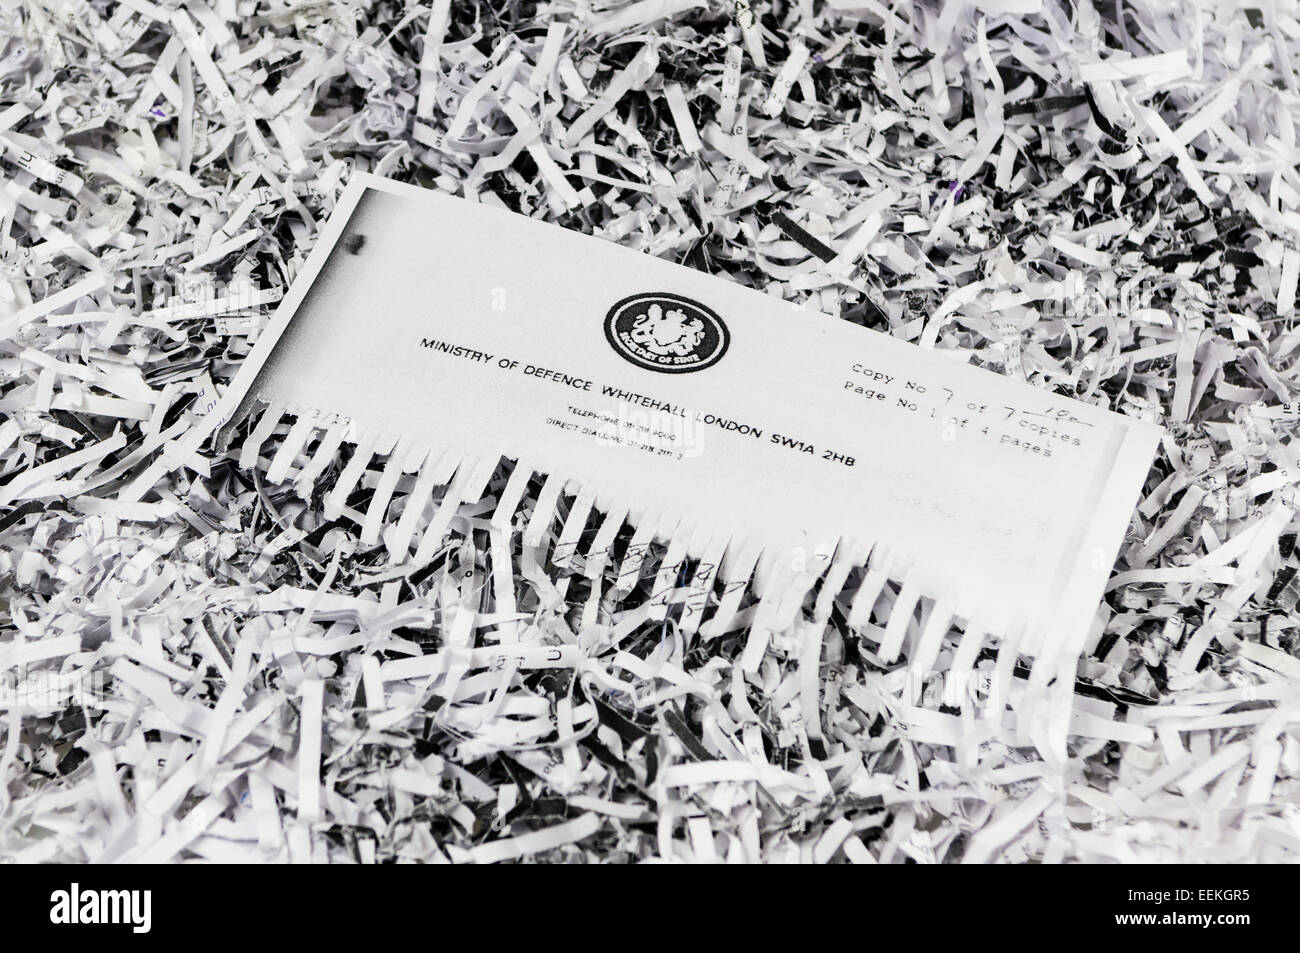 Half shredded correspondence from the UK Ministry of Defence. Stock Photo